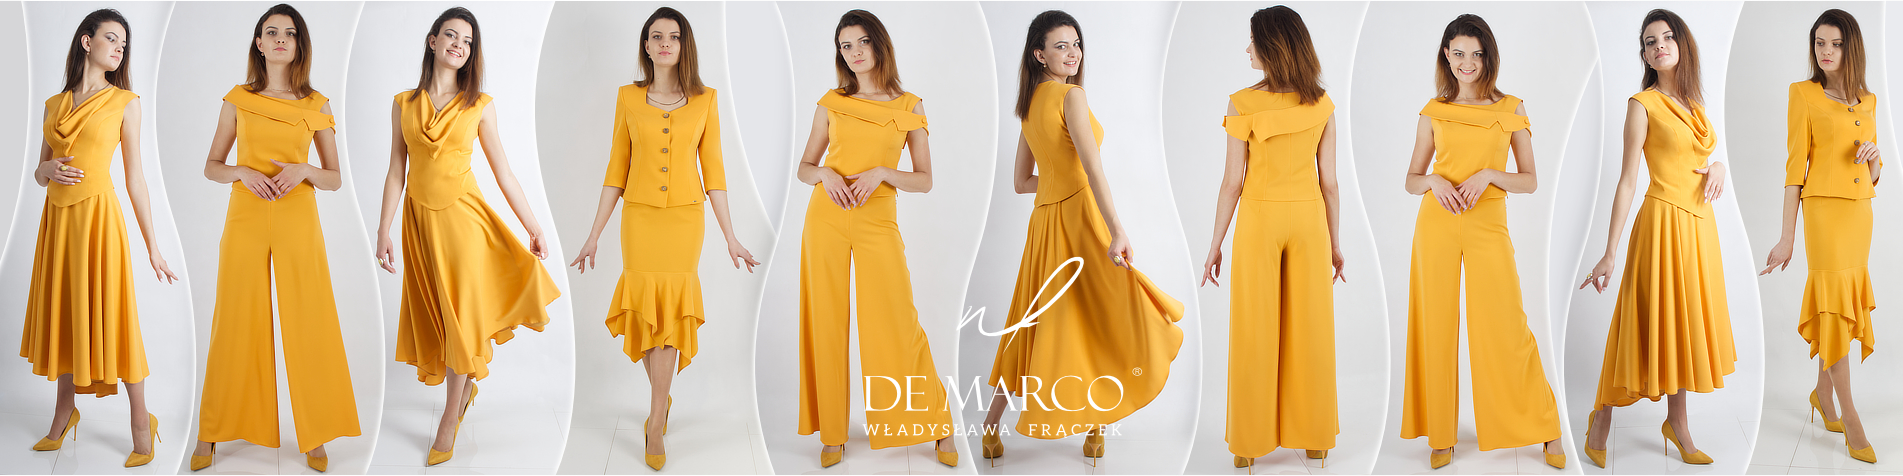 Mustard women’s ensembles with trousers or skirt for wedding